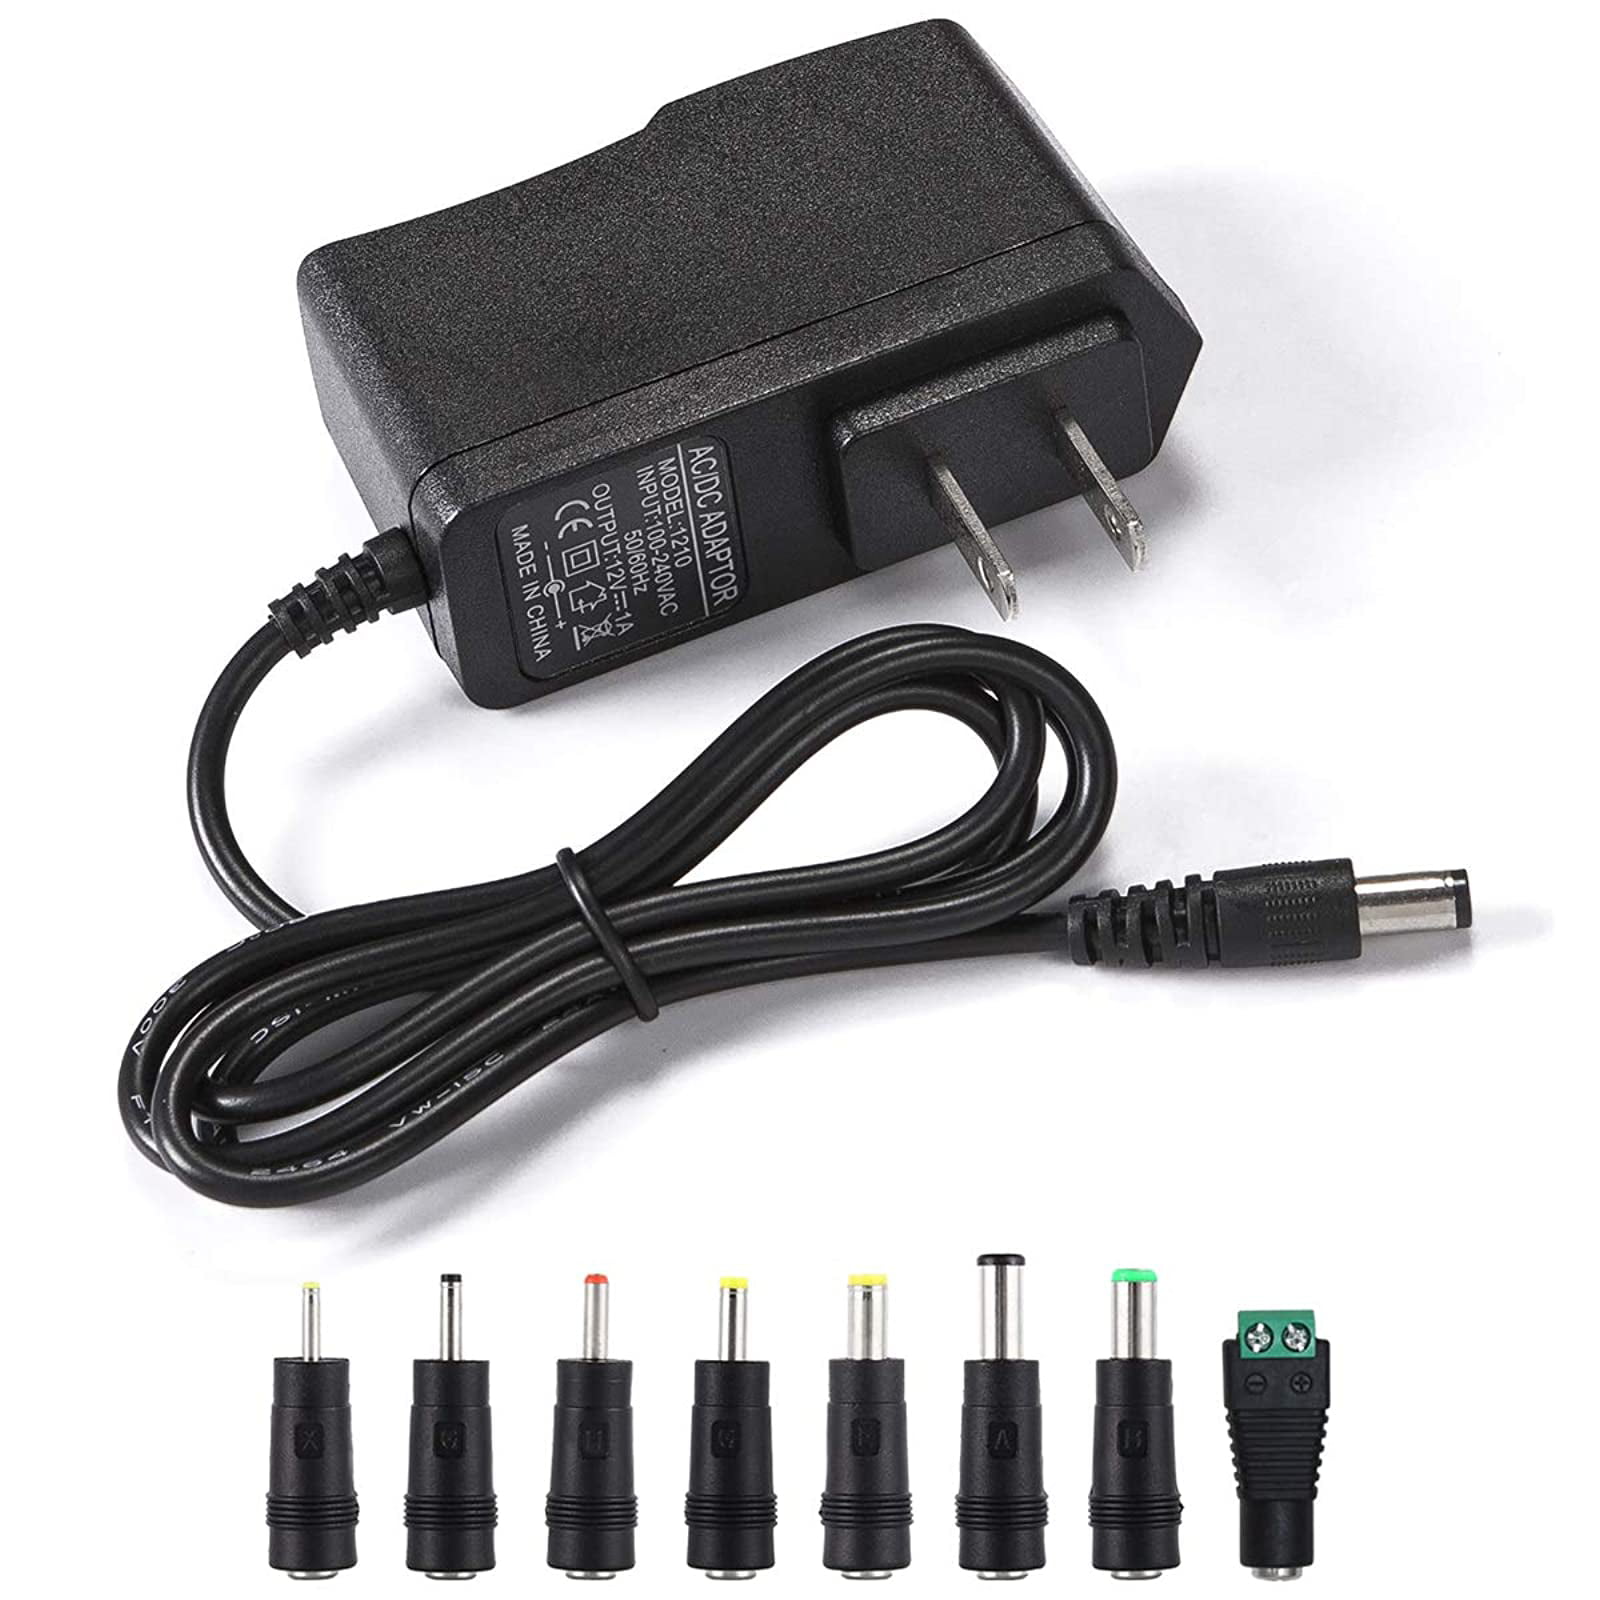 1A 12V POWER SUPPLY ADAPTER CHARGER FOR LED STRIP LIGHT CCTV CAMERA 